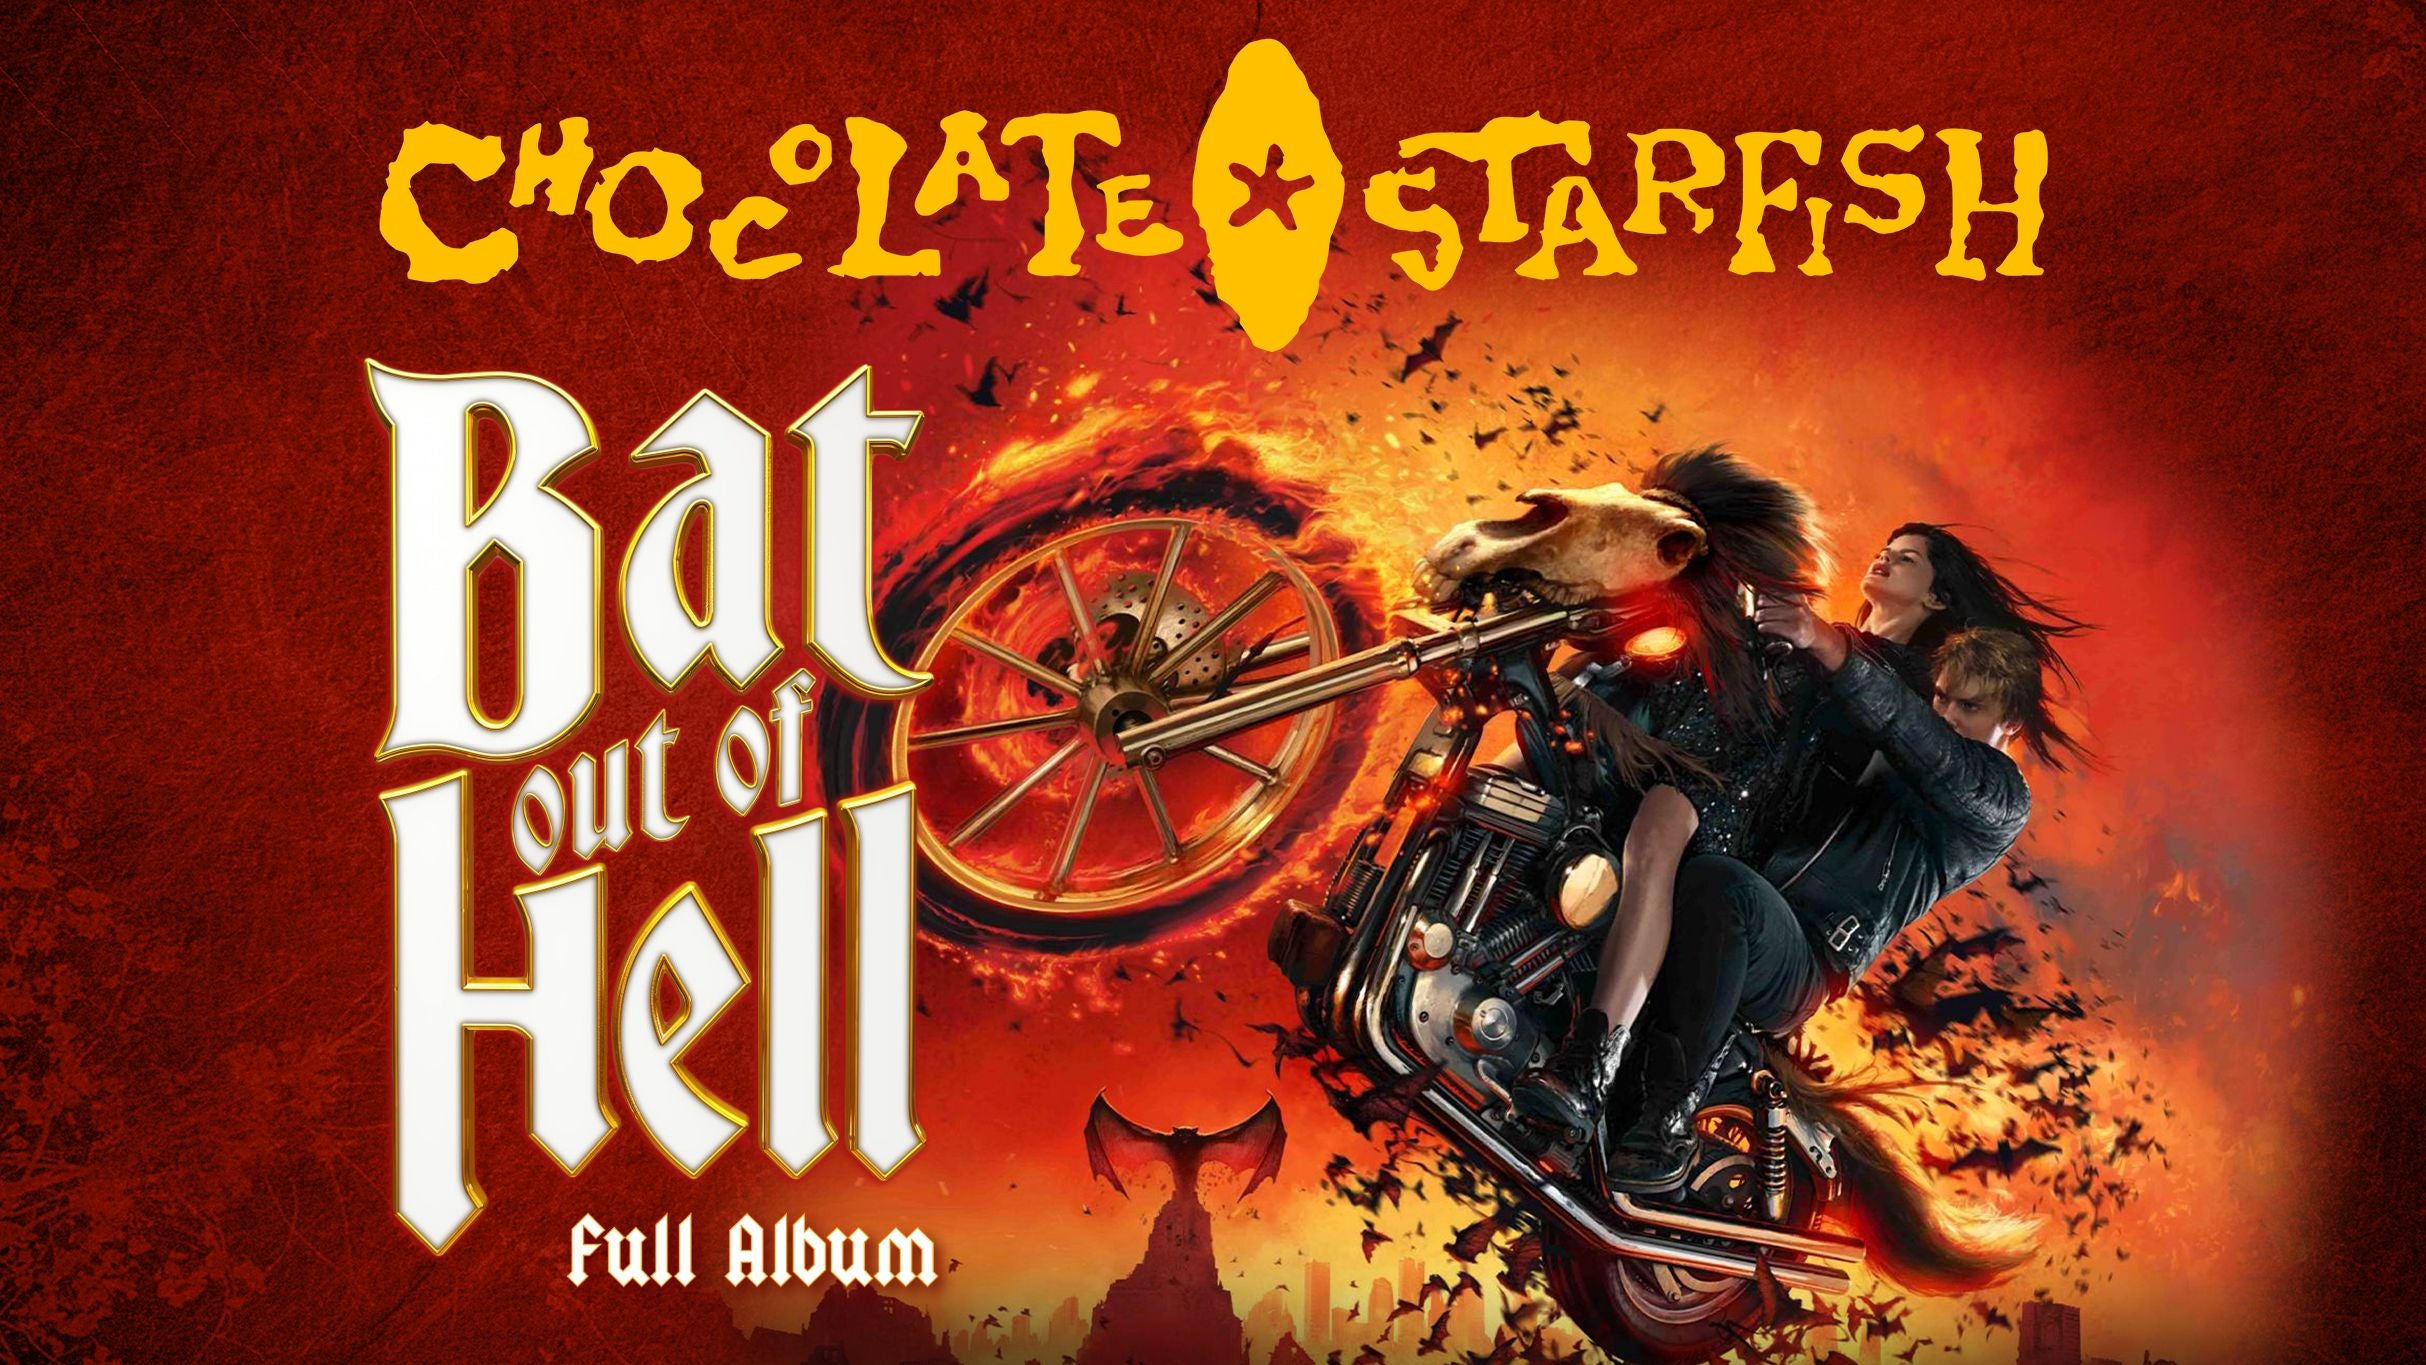 Image used with permission from Ticketmaster | Chocolate Starfish - Bat Out of Hell tickets